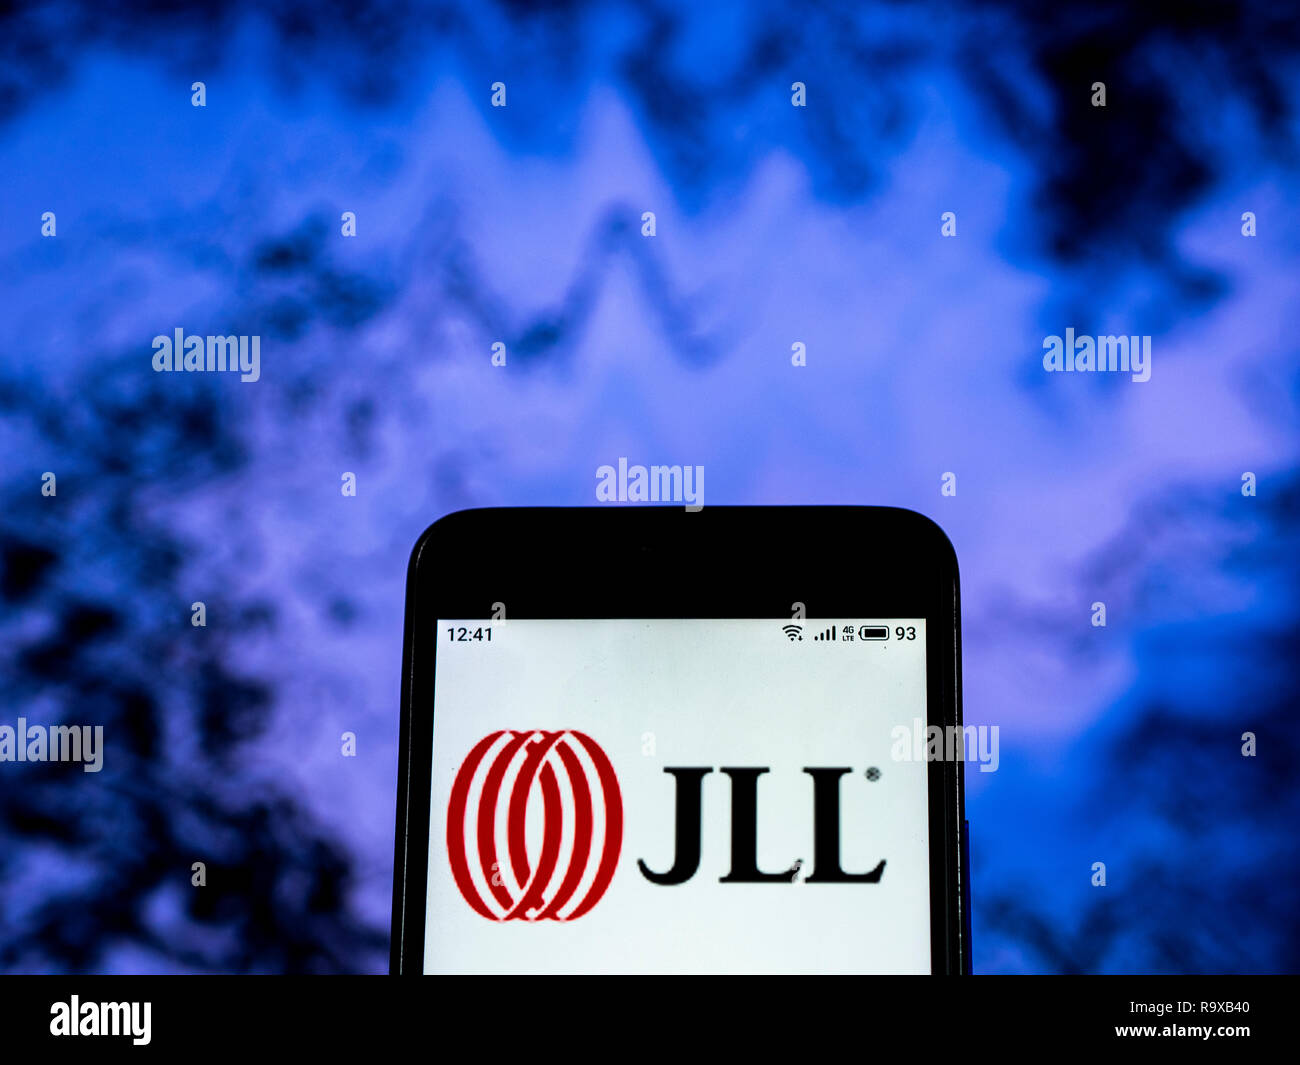 Jones Lang LaSalle Incorporated Investment management company logo seen displayed on smart phone Stock Photo